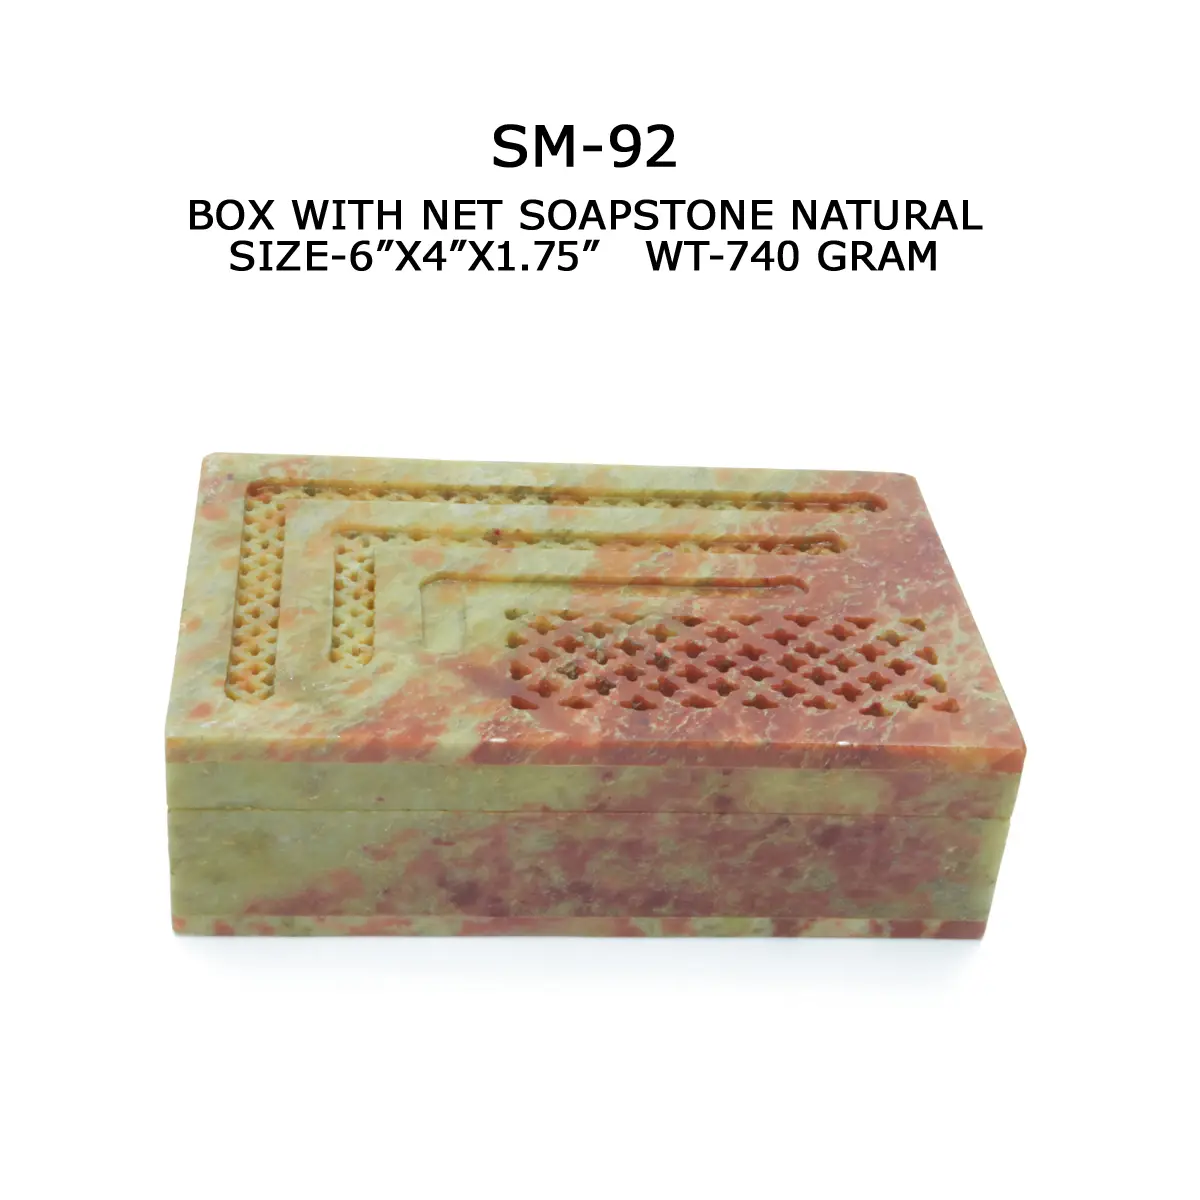 BOx WITH NET SOAPSTONE NATURAL